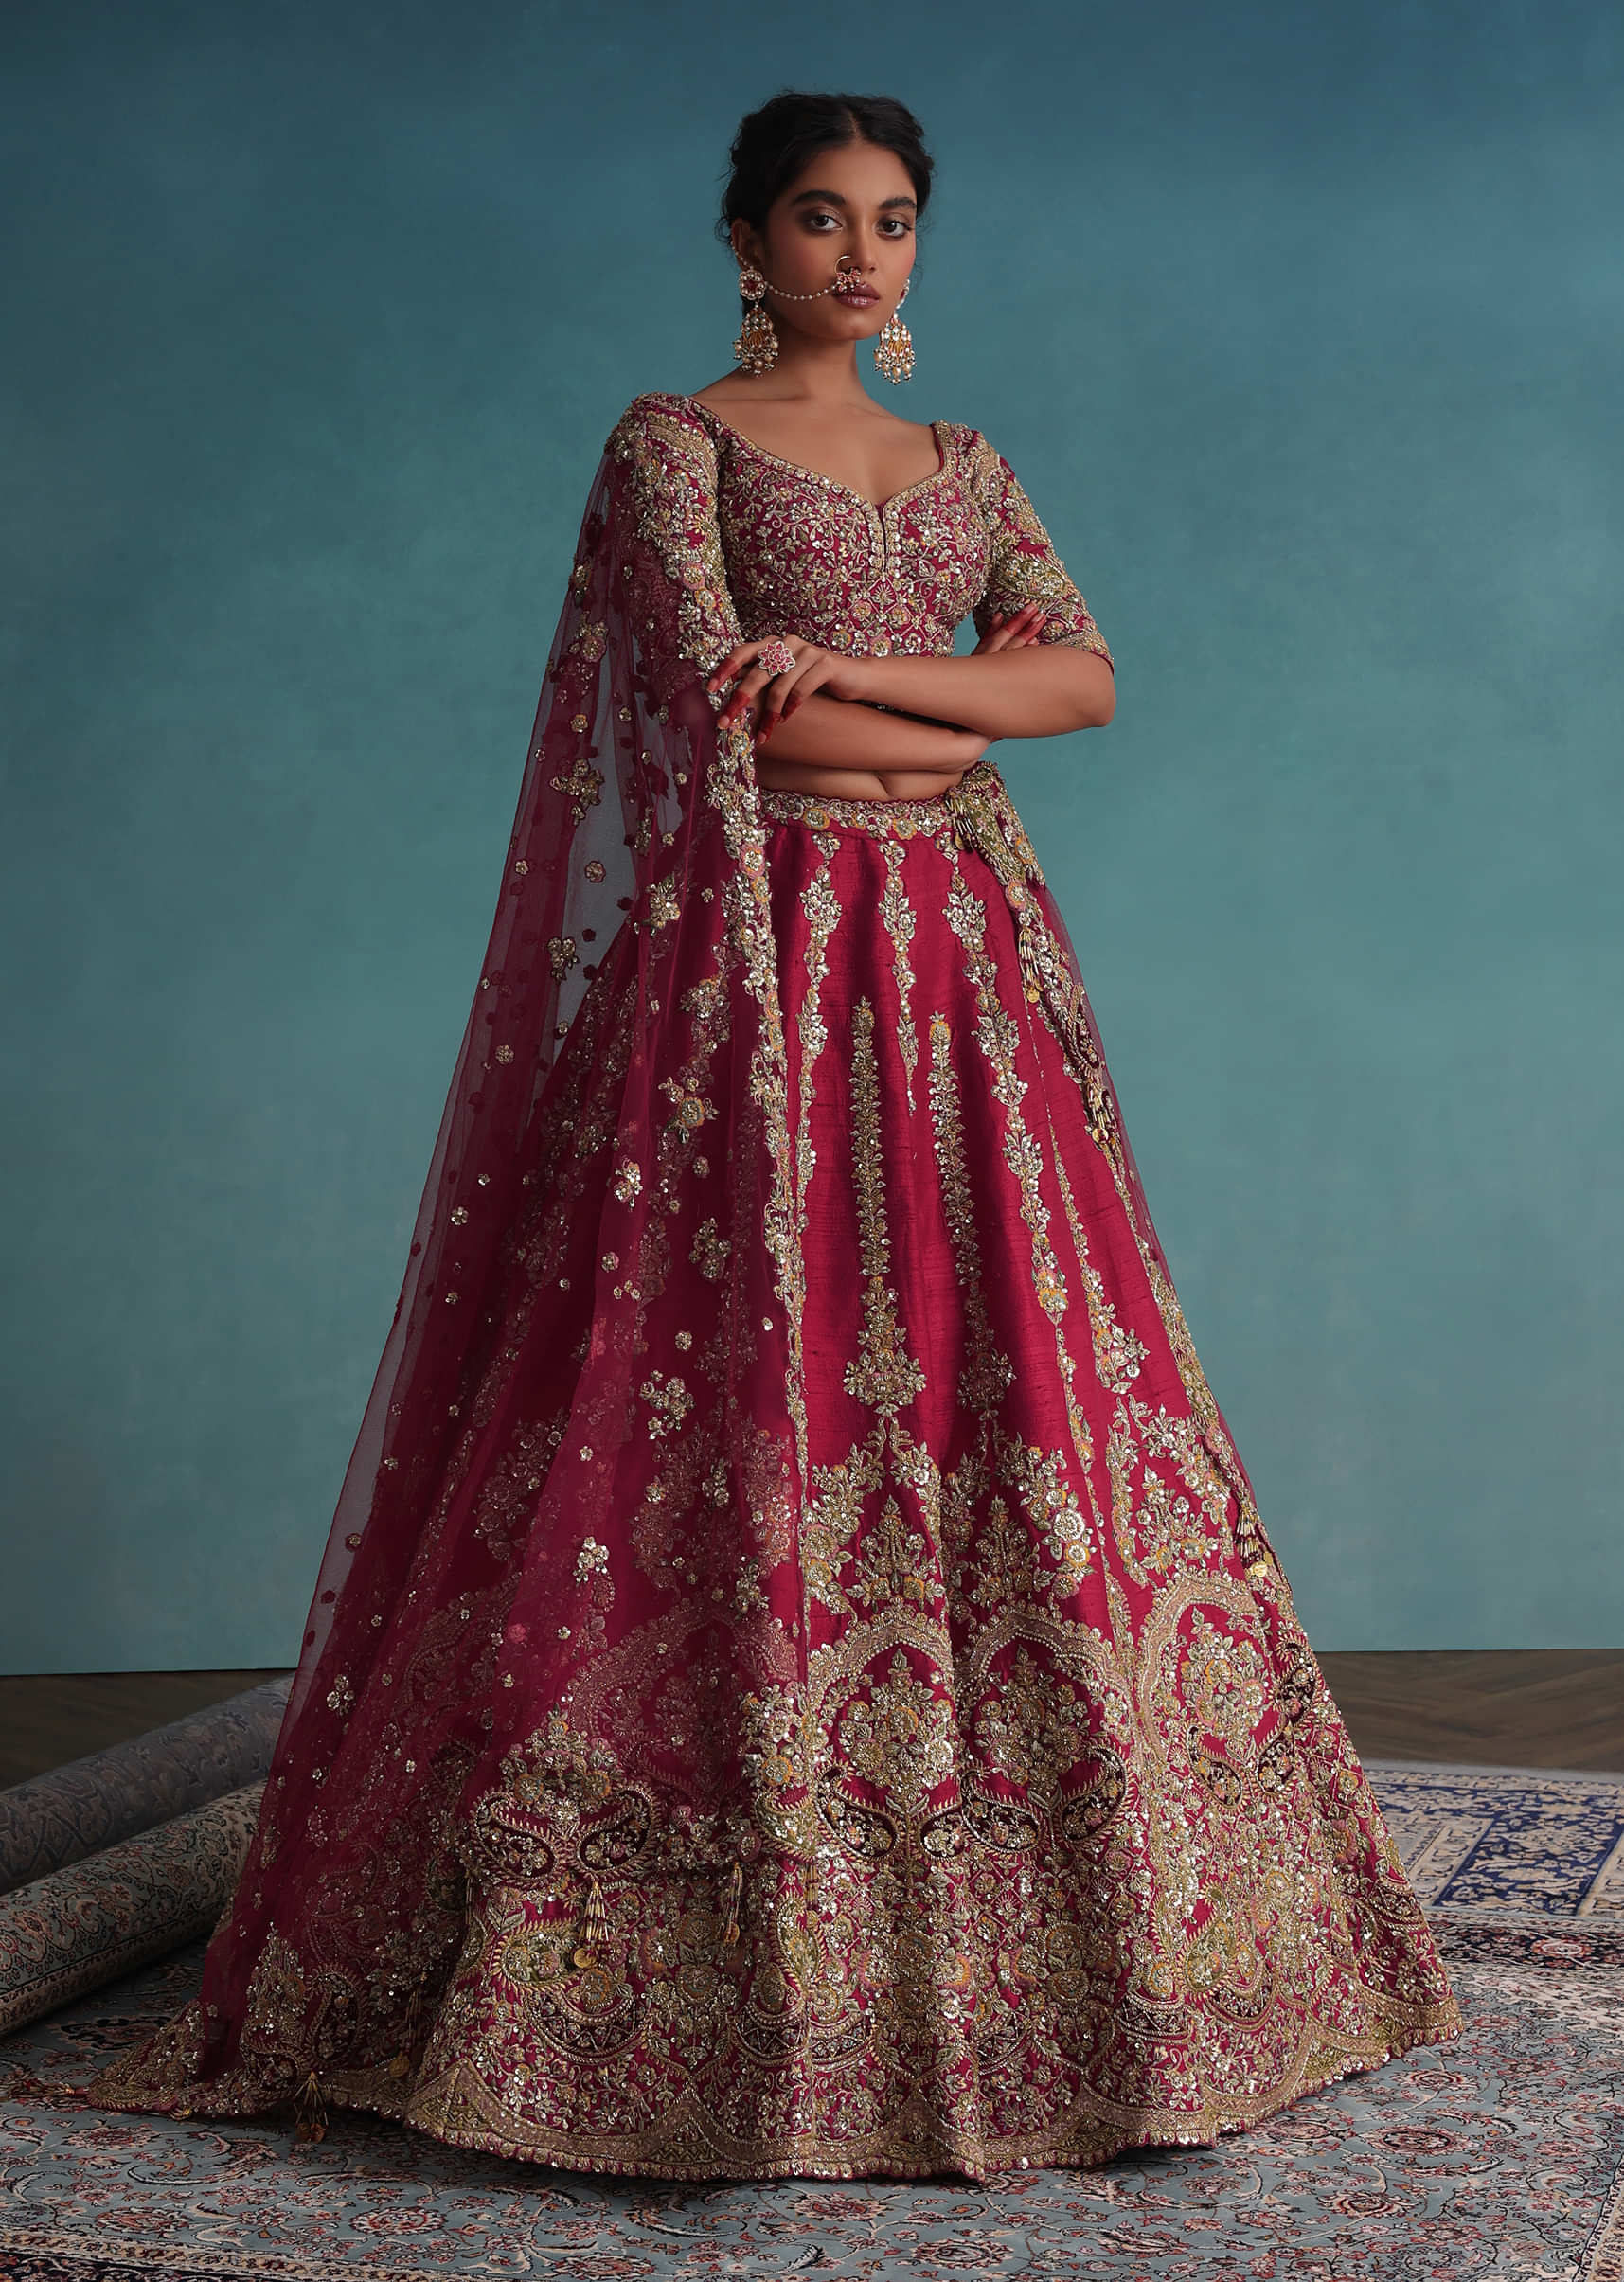 Discover more than 158 best cheap lehenga online latest